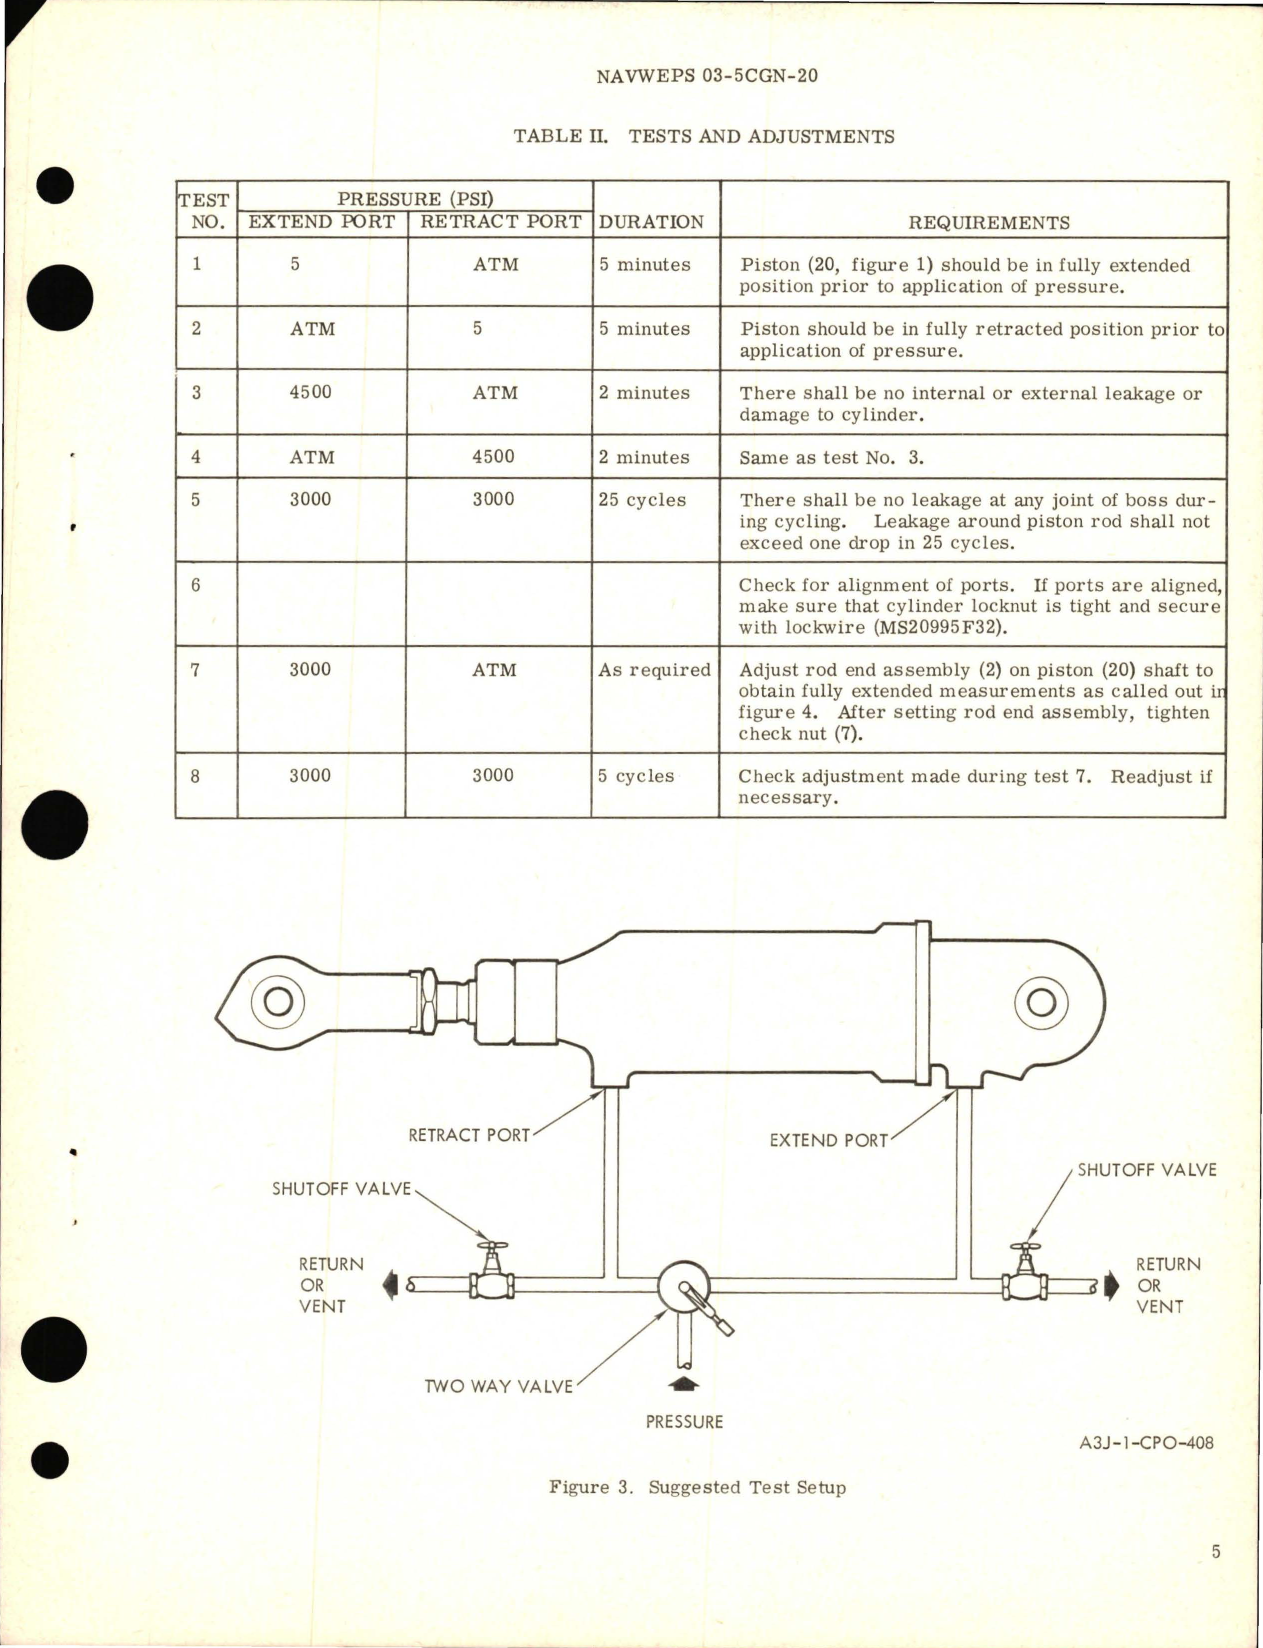 Sample page 5 from AirCorps Library document: Overhaul Instructions with Parts Breakdown for Hydraulic Tail Fold Actuator Assemblies - Part 247-58170 and 247-58170-11 